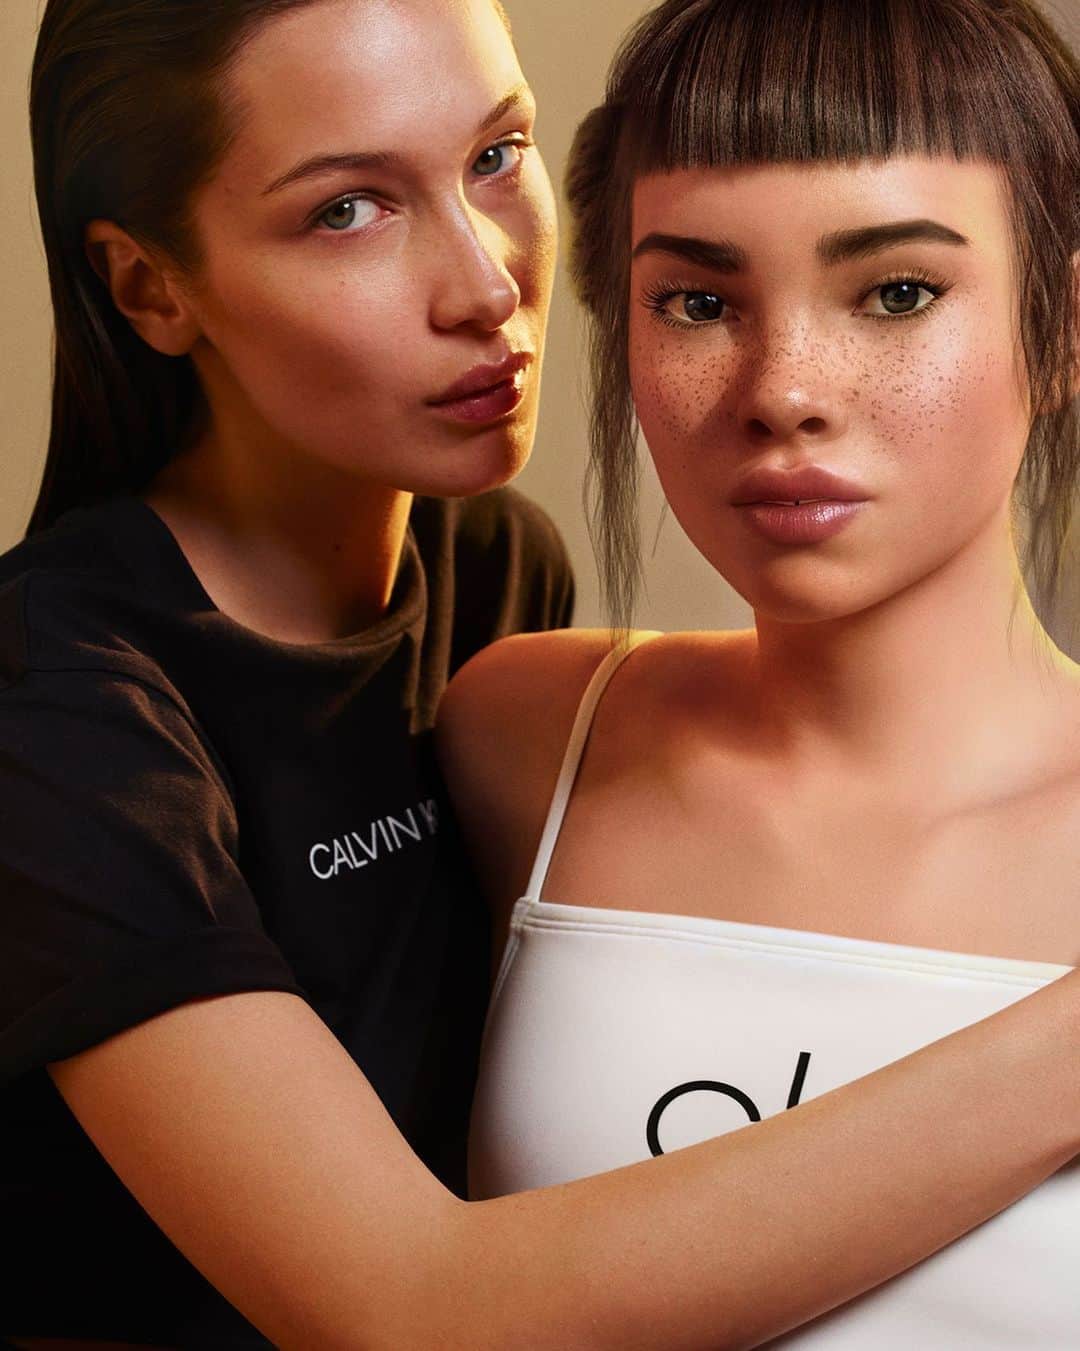 Calvin Kleinさんのインスタグラム写真 - (Calvin KleinInstagram)「“I think being vulnerable makes you more truthful with yourself,” — #BellaHadid, pictured with 19-year-old robot #LilMiquela ⠀⠀⠀⠀⠀⠀⠀⠀⠀⠀⠀⠀⠀⠀⠀⠀⠀⠀⠀⠀⠀⠀⠀⠀⠀⠀⠀⠀⠀⠀⠀⠀⠀⠀⠀ Shot by @mario_sorrenti ⠀⠀⠀⠀⠀⠀⠀⠀⠀⠀⠀⠀⠀⠀⠀⠀⠀⠀⠀⠀⠀⠀⠀⠀⠀⠀⠀ #MYTRUTH #MYCALVINS ⠀⠀⠀⠀⠀⠀⠀⠀⠀⠀⠀⠀⠀⠀⠀⠀⠀⠀⠀⠀⠀⠀⠀⠀⠀⠀⠀ ⠀⠀⠀⠀⠀⠀⠀⠀⠀⠀⠀⠀⠀⠀⠀⠀⠀⠀⠀⠀⠀⠀⠀⠀⠀⠀⠀ Shop @BellaHadid and @lilmiquela’s looks at calvinklein.com/mycalvins: Cotton Cropped T-Shirt (US and EU Only) CK Retro Swimsuit (Global)」5月16日 23時07分 - calvinklein